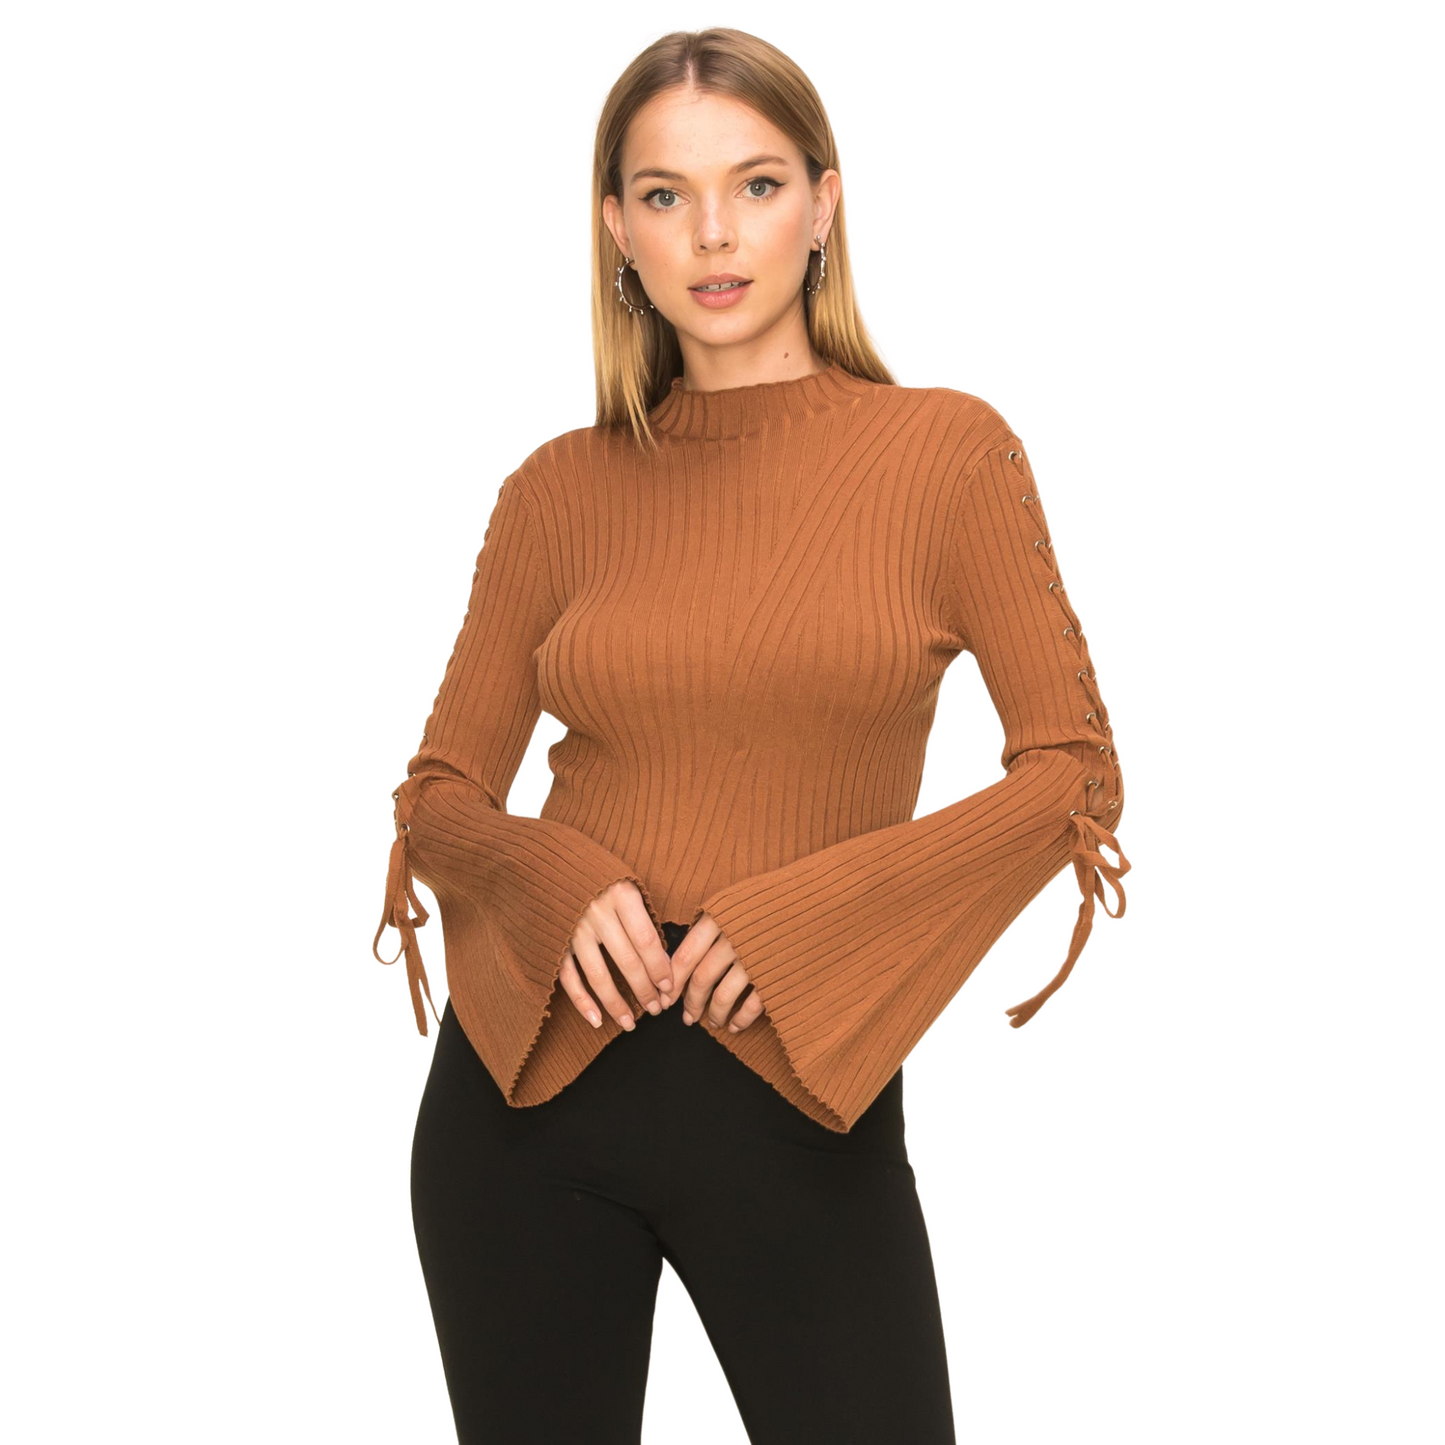 Hyfve Solid Knit Top W/ Lace & Bell Sleeves (3 Colors! S-L)